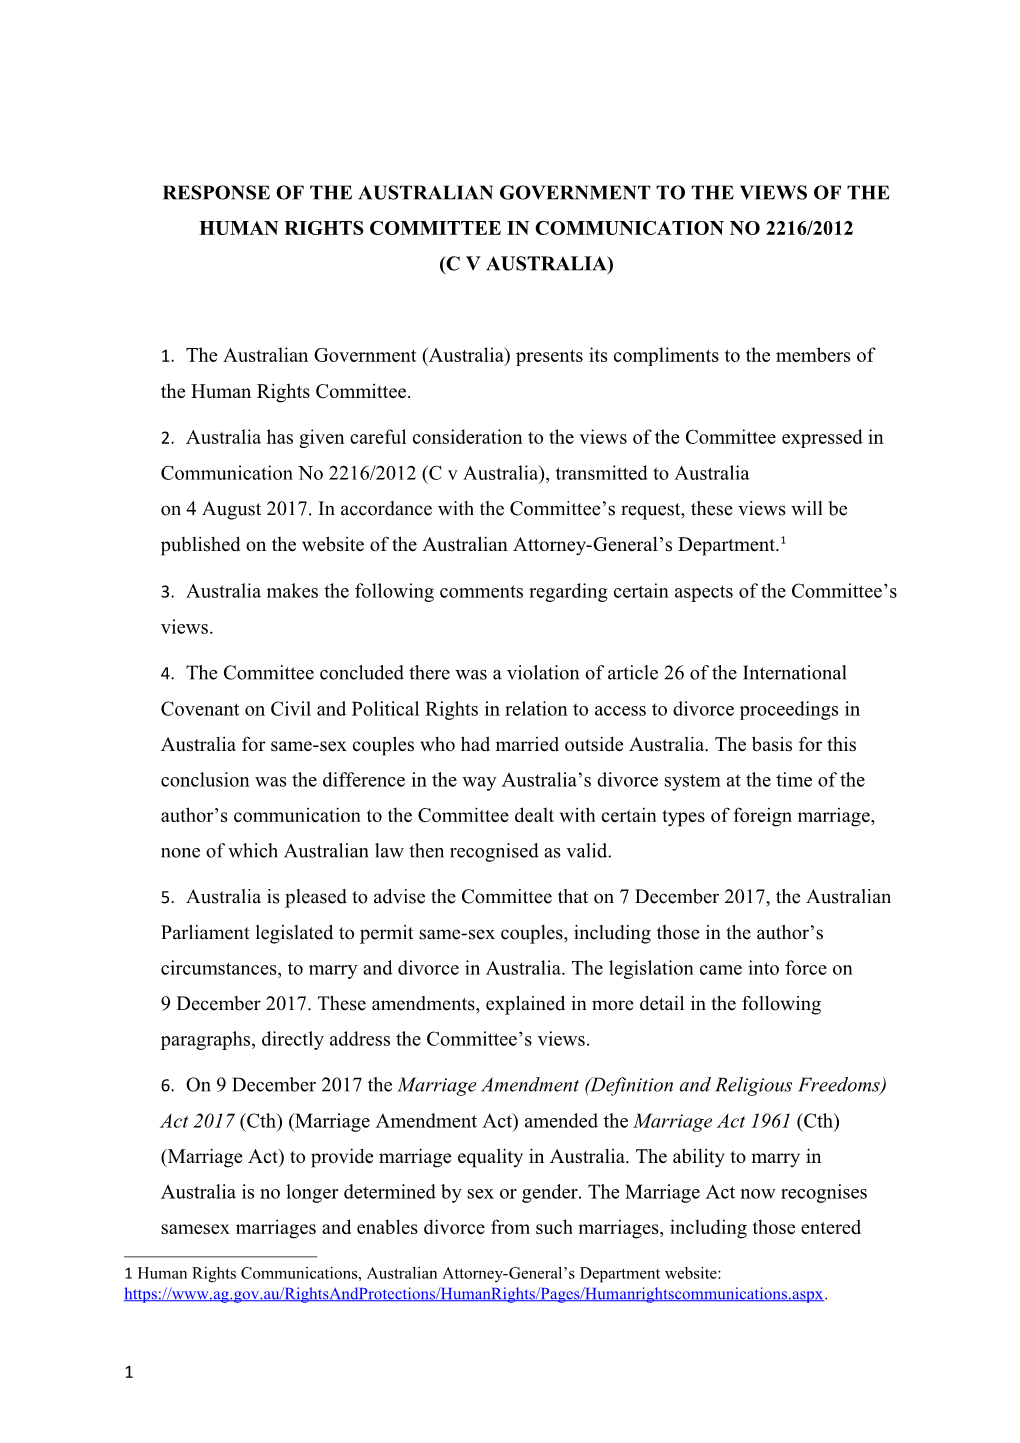 Response of the Australian Government to the Views of the Human Rights Committee In